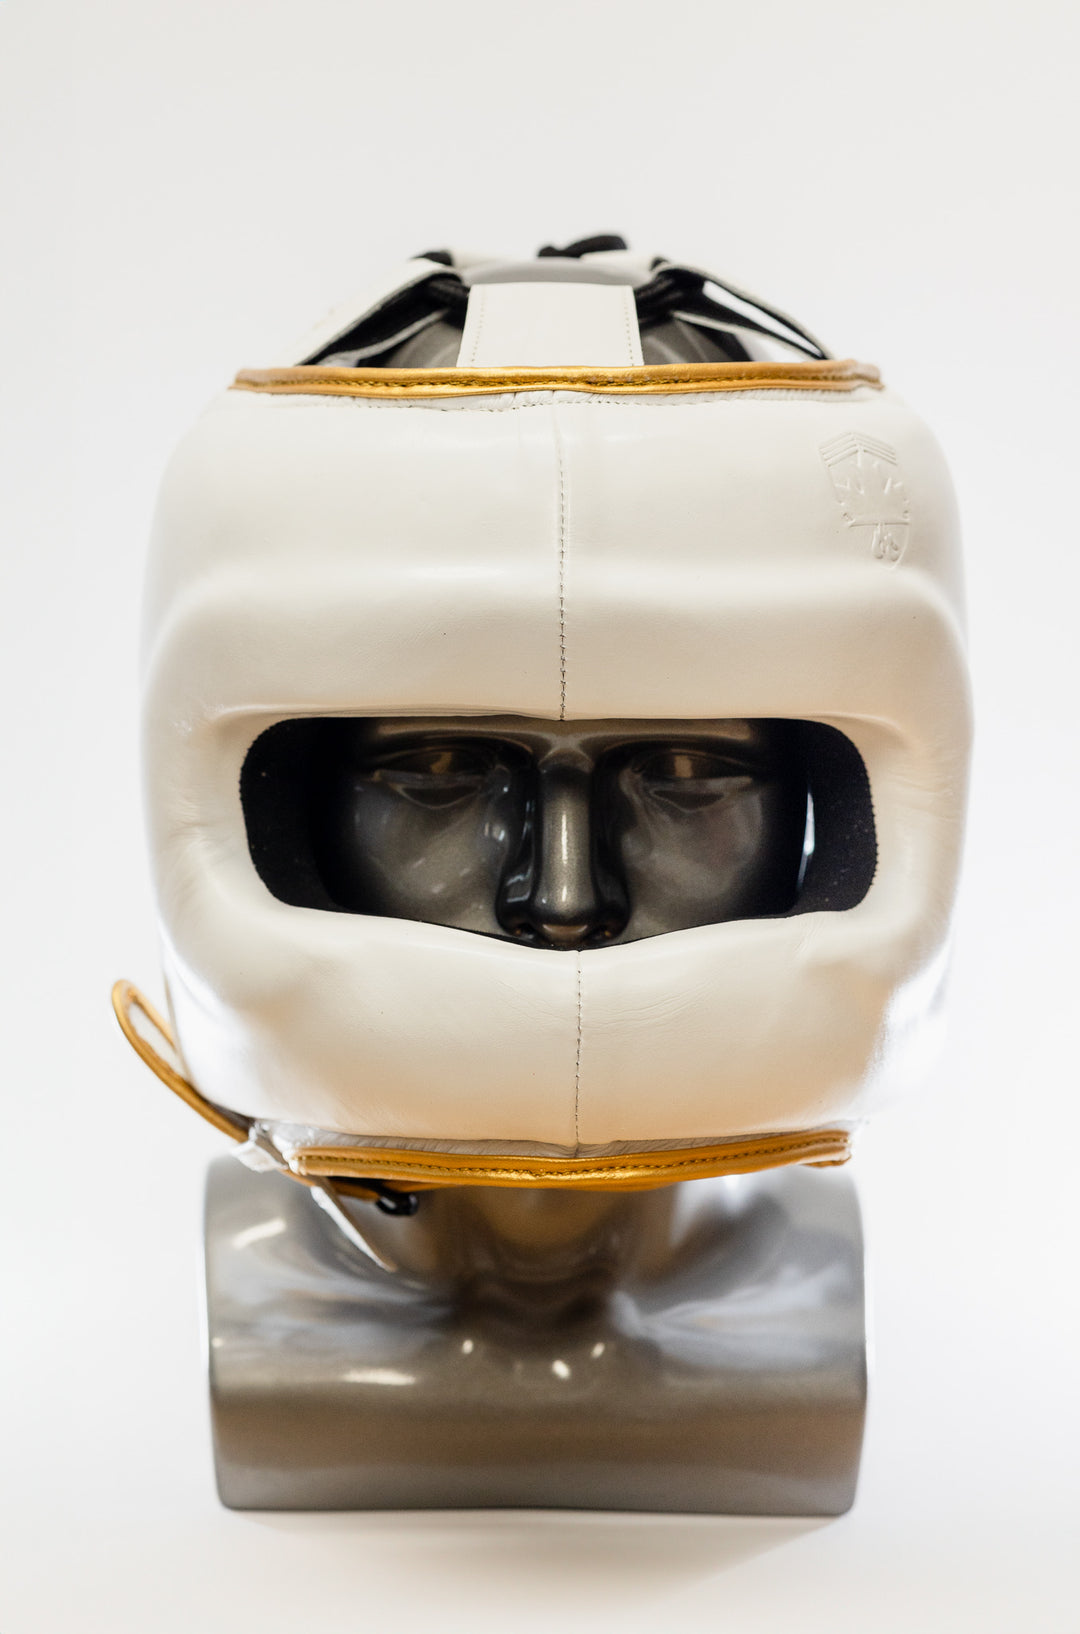 H90 SPARRING HEAD GUARD- WHITE/GOLD